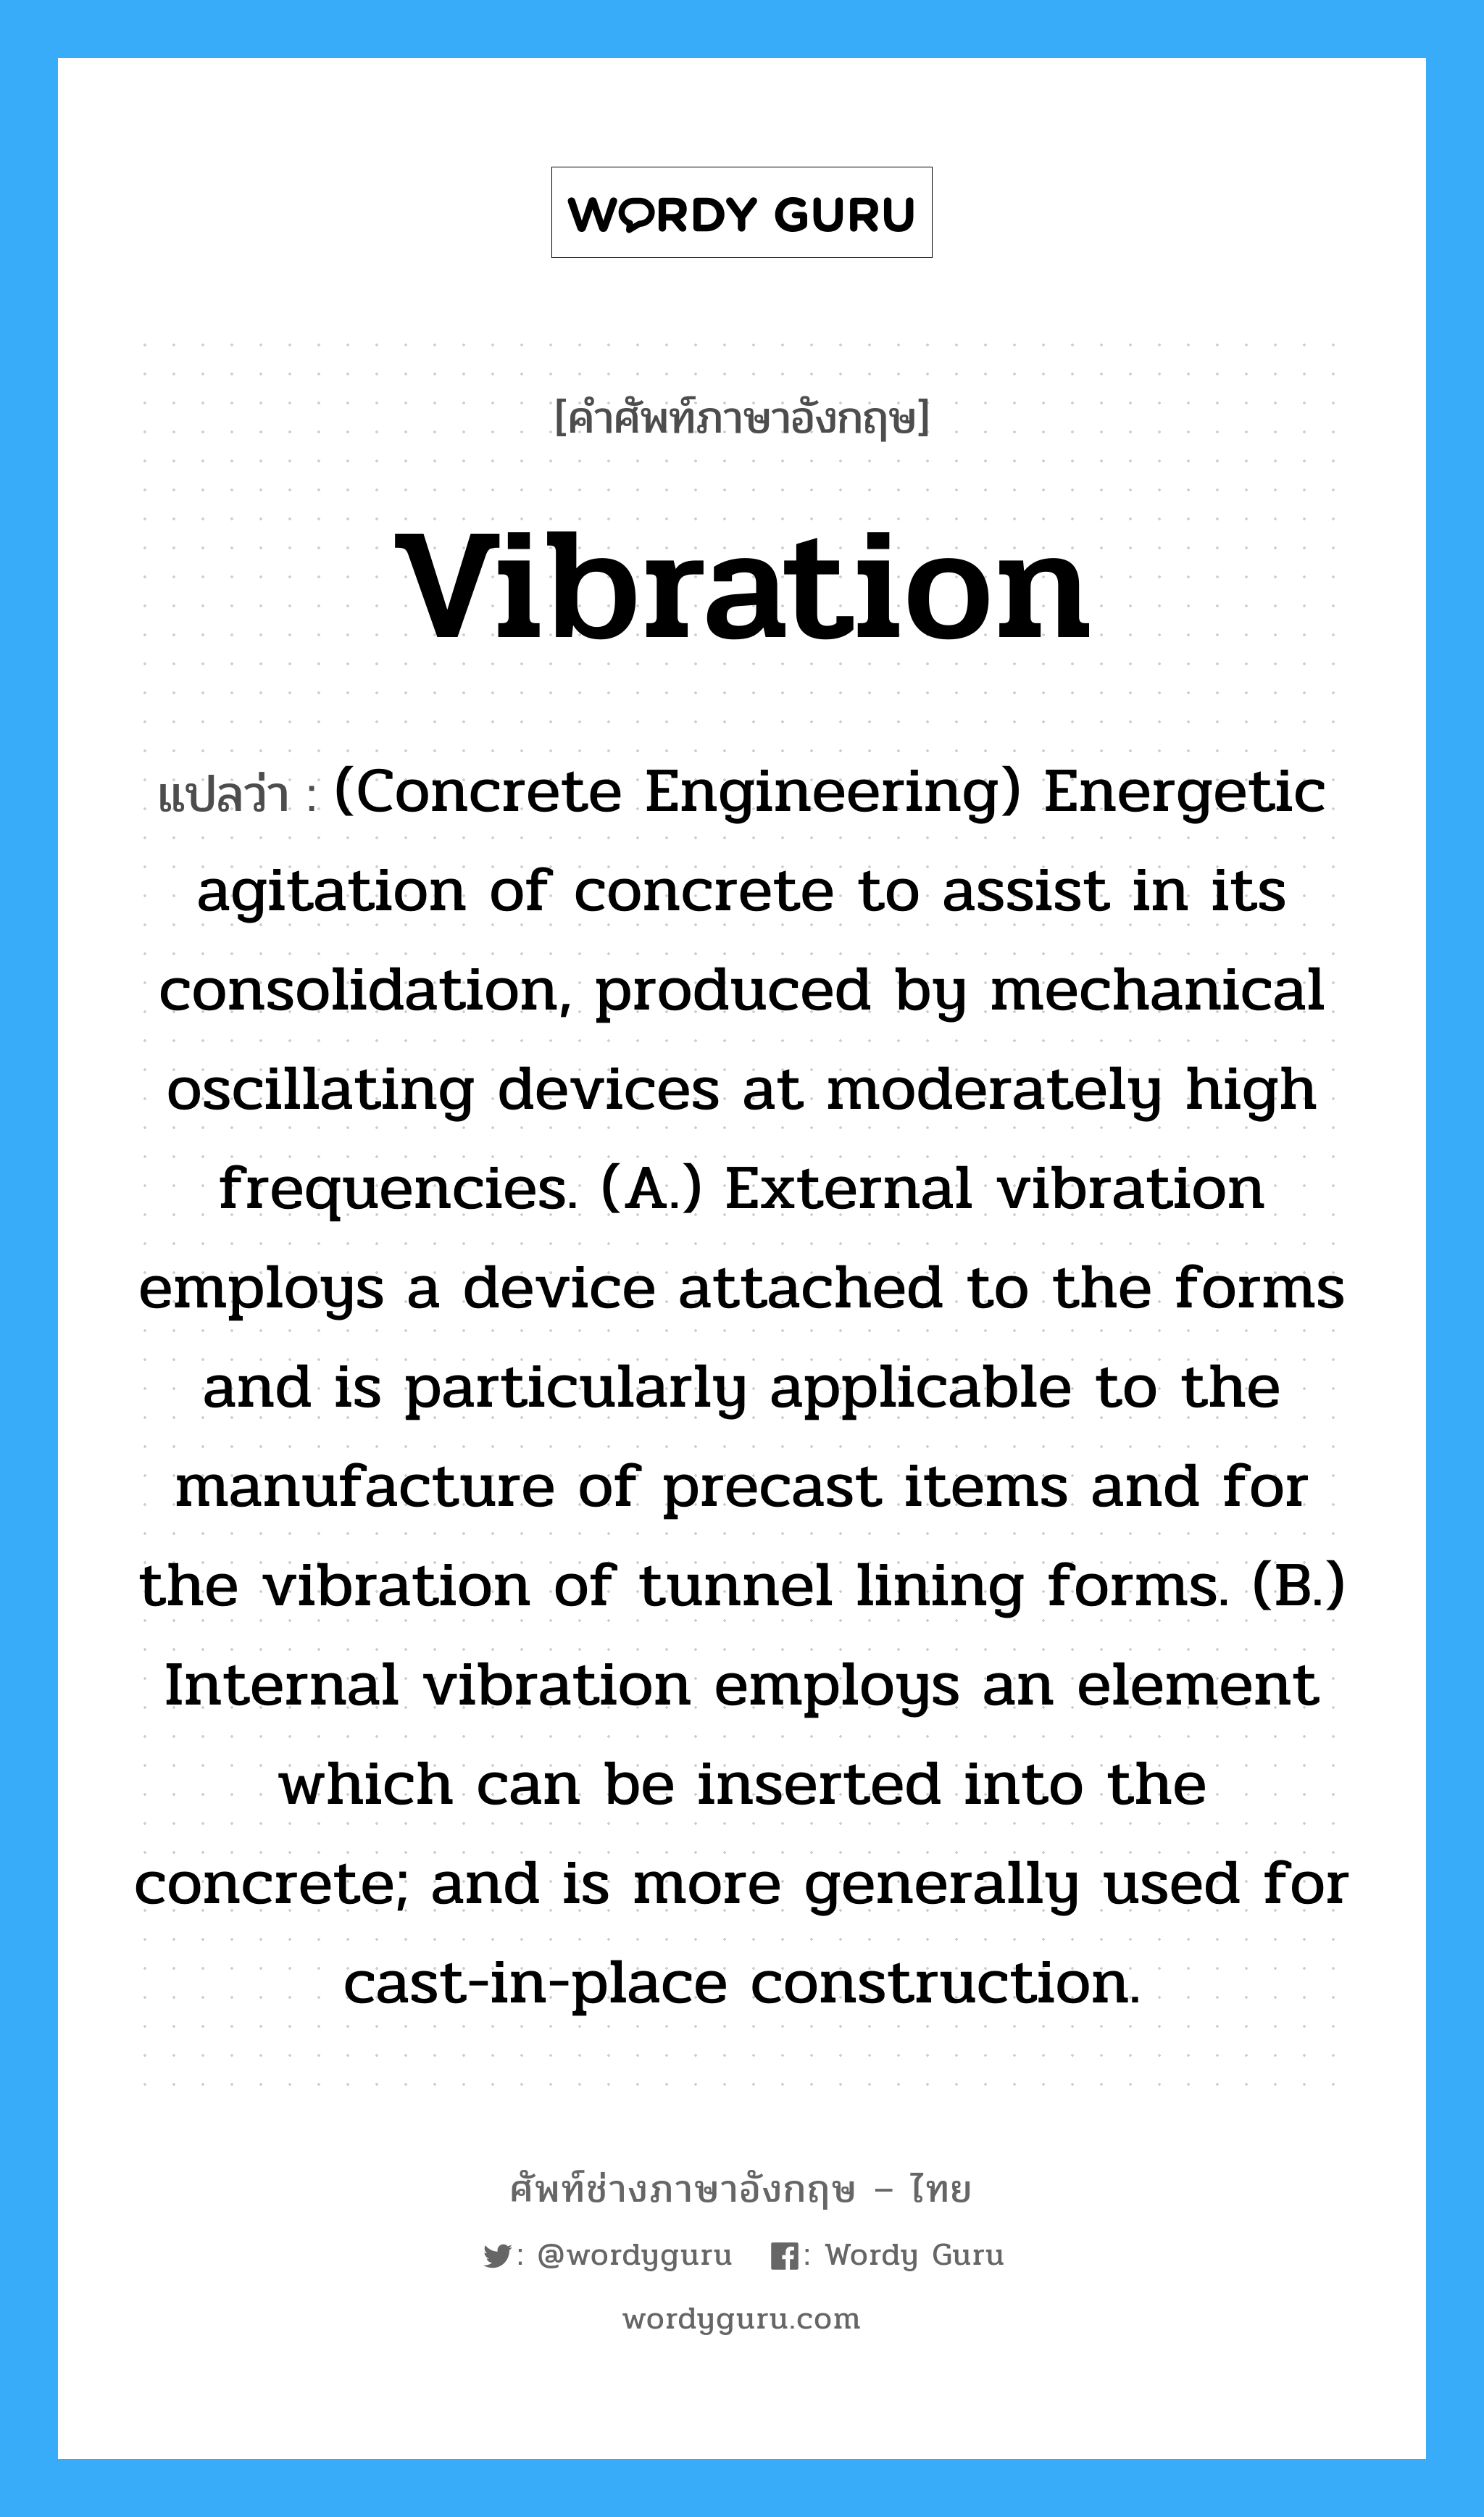 Vibration แปลว่า?, คำศัพท์ช่างภาษาอังกฤษ - ไทย Vibration คำศัพท์ภาษาอังกฤษ Vibration แปลว่า (Concrete Engineering) Energetic agitation of concrete to assist in its consolidation, produced by mechanical oscillating devices at moderately high frequencies. (A.) External vibration employs a device attached to the forms and is particularly applicable to the manufacture of precast items and for the vibration of tunnel lining forms. (B.) Internal vibration employs an element which can be inserted into the concrete; and is more generally used for cast-in-place construction.